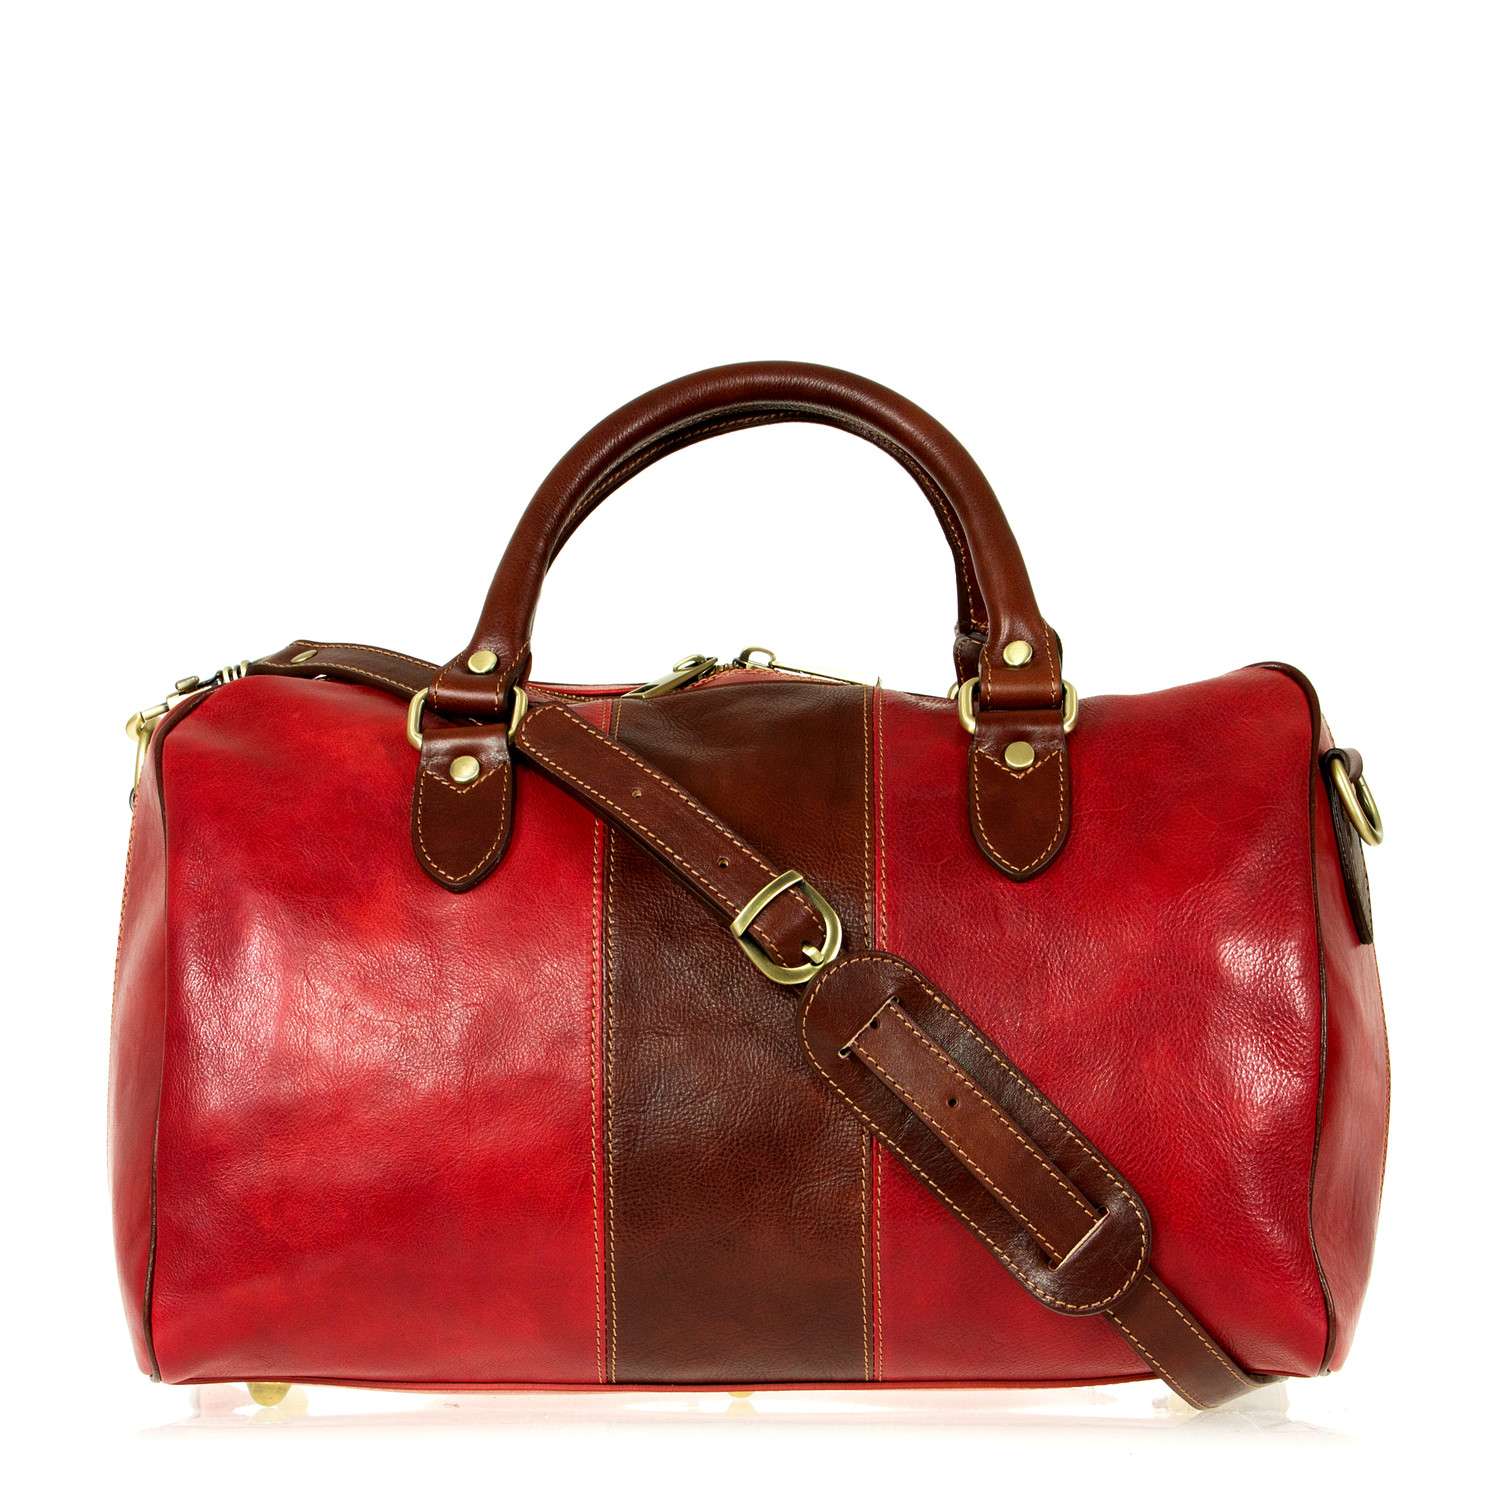 Auguste Travel Bag // Red + Brown - Viola Castellani - Touch of Modern